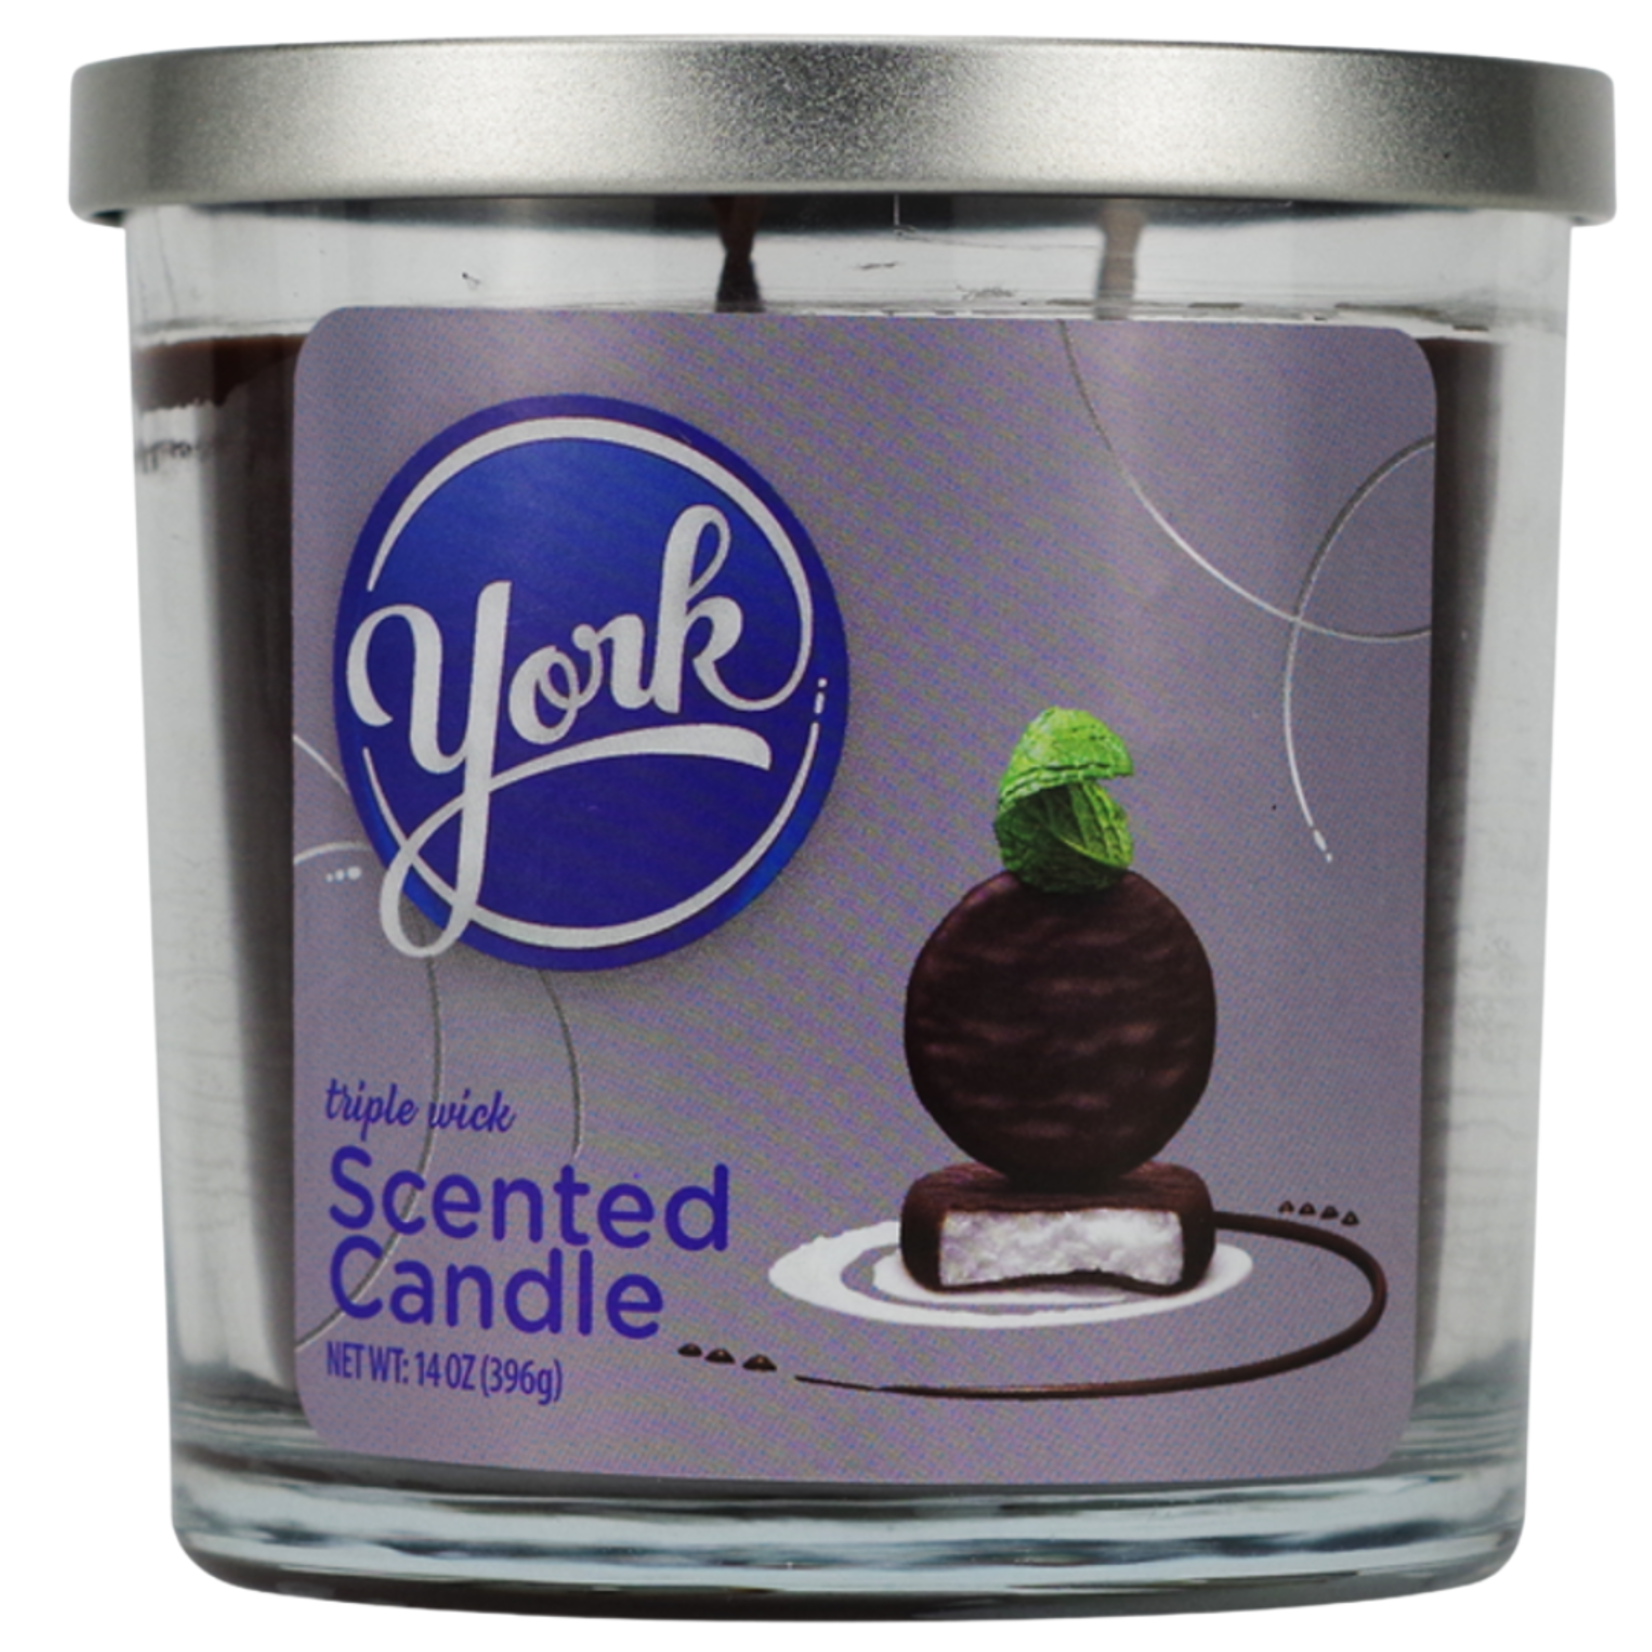 Sweets Candles - Page 2